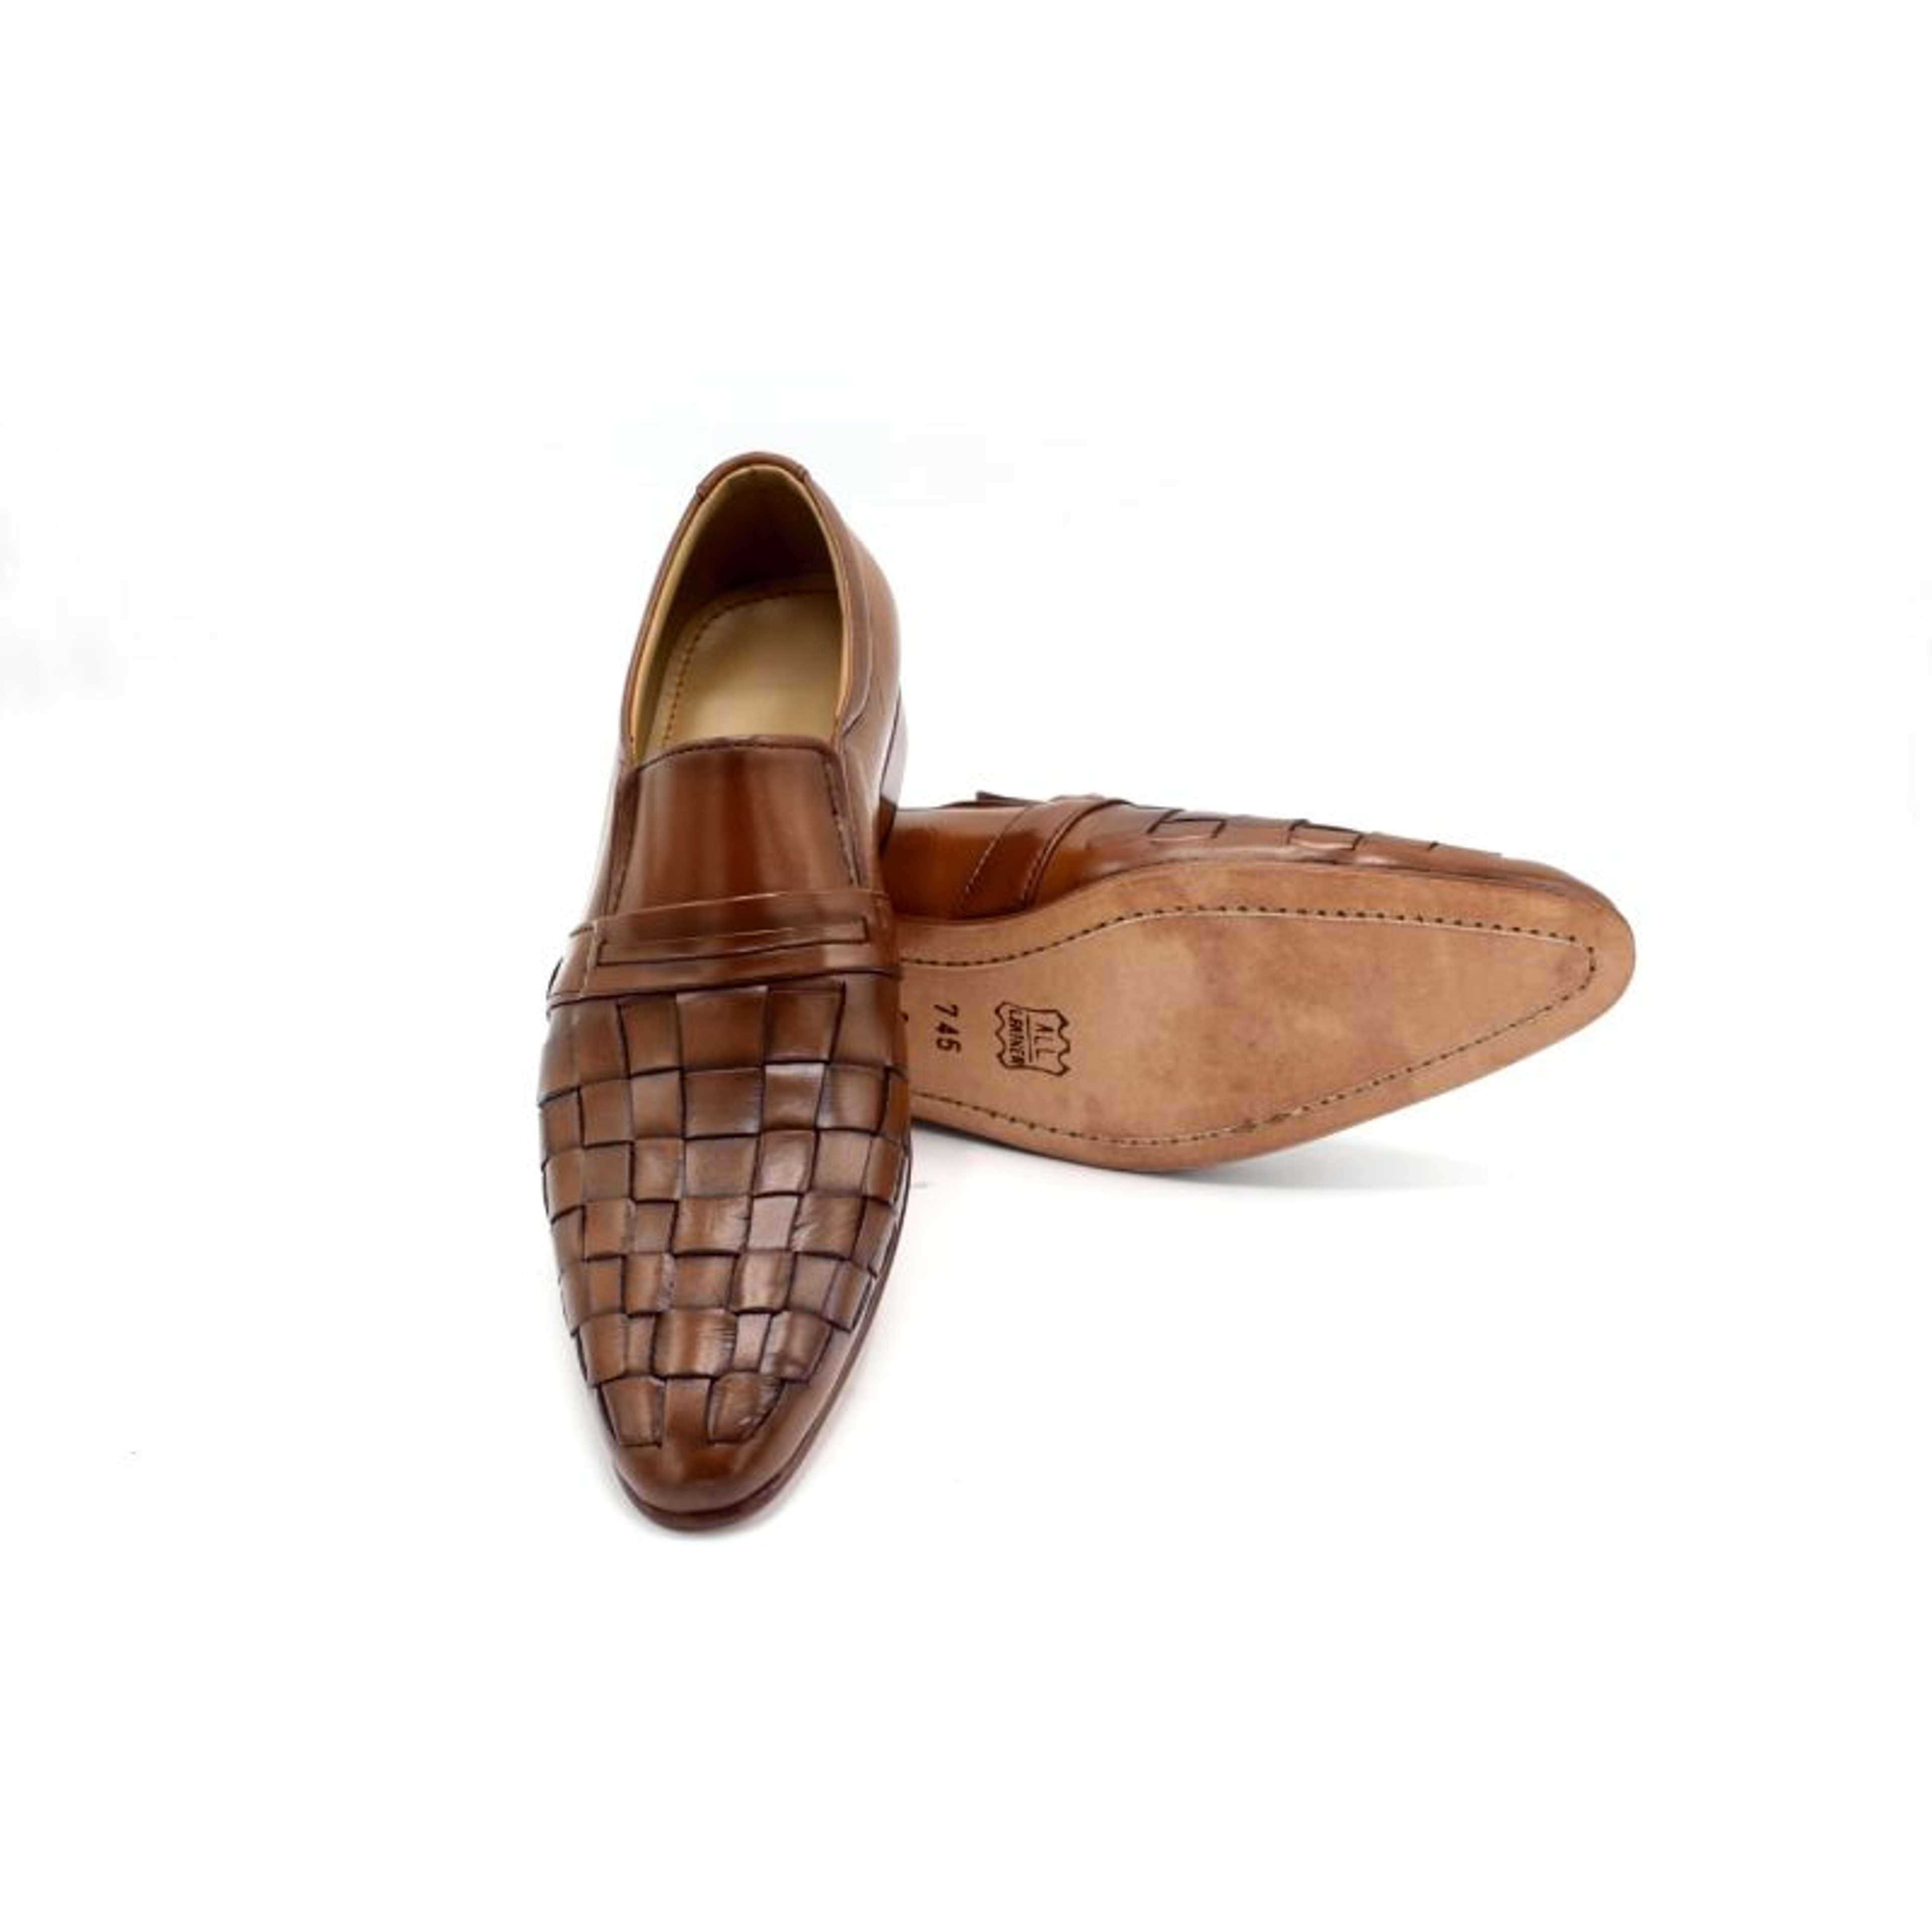 "Uper Leather Sole Leather Lining Cow Woven Leather"